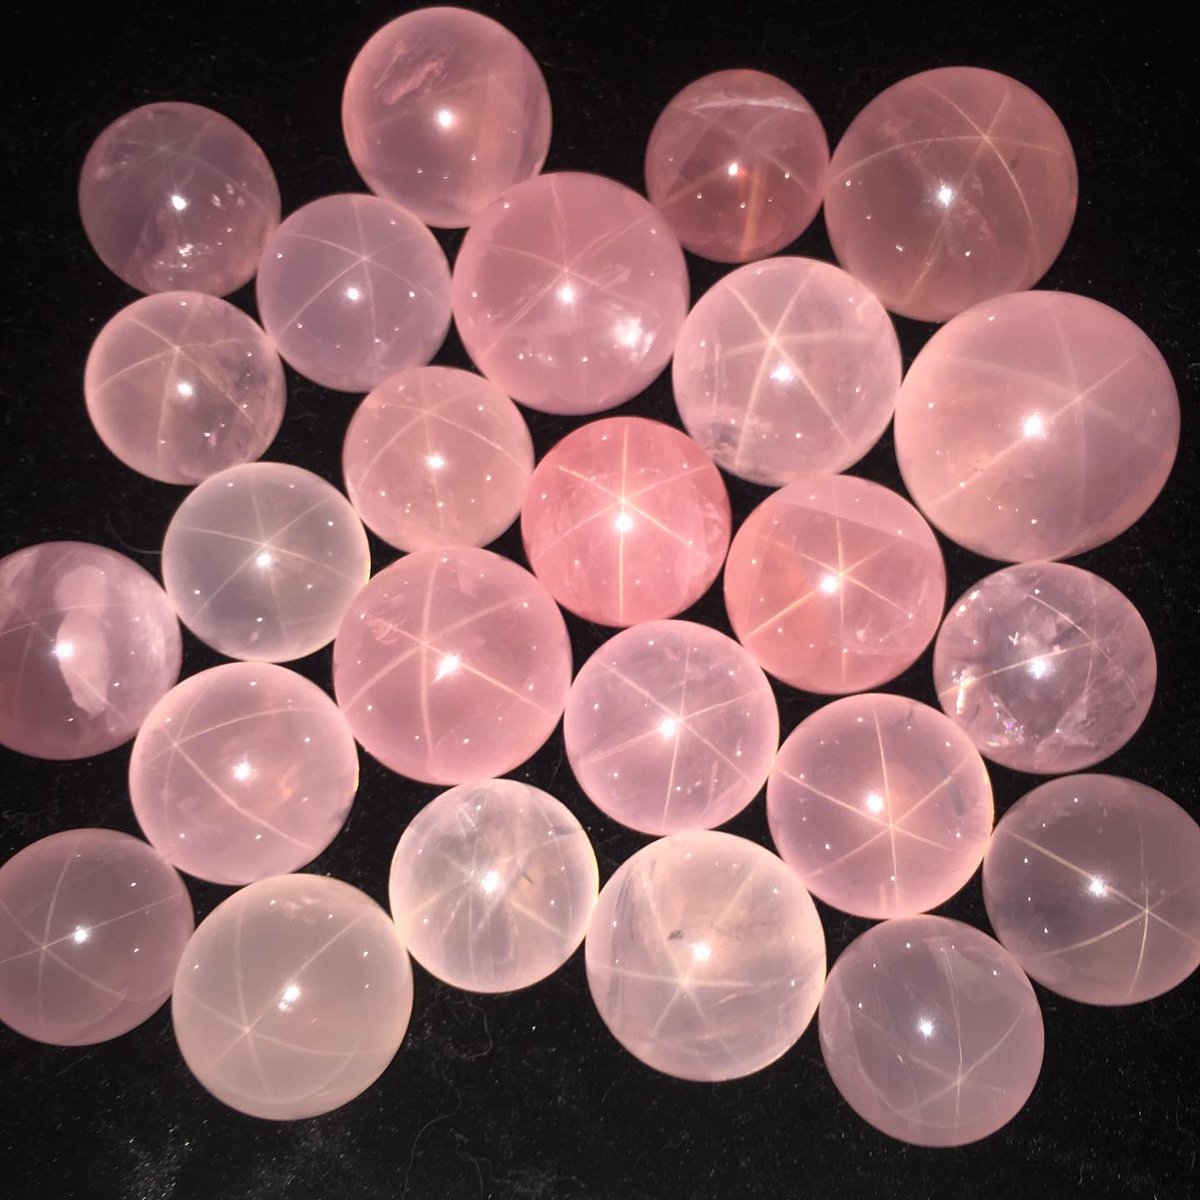 Asterism, or the “star stone” effect, occurs rarely in quartz but is especially striking in rose quartz spheres. Since these gems may contain microscopic inclusions of rutile needles. Credits: 📷 superseven.cn IG